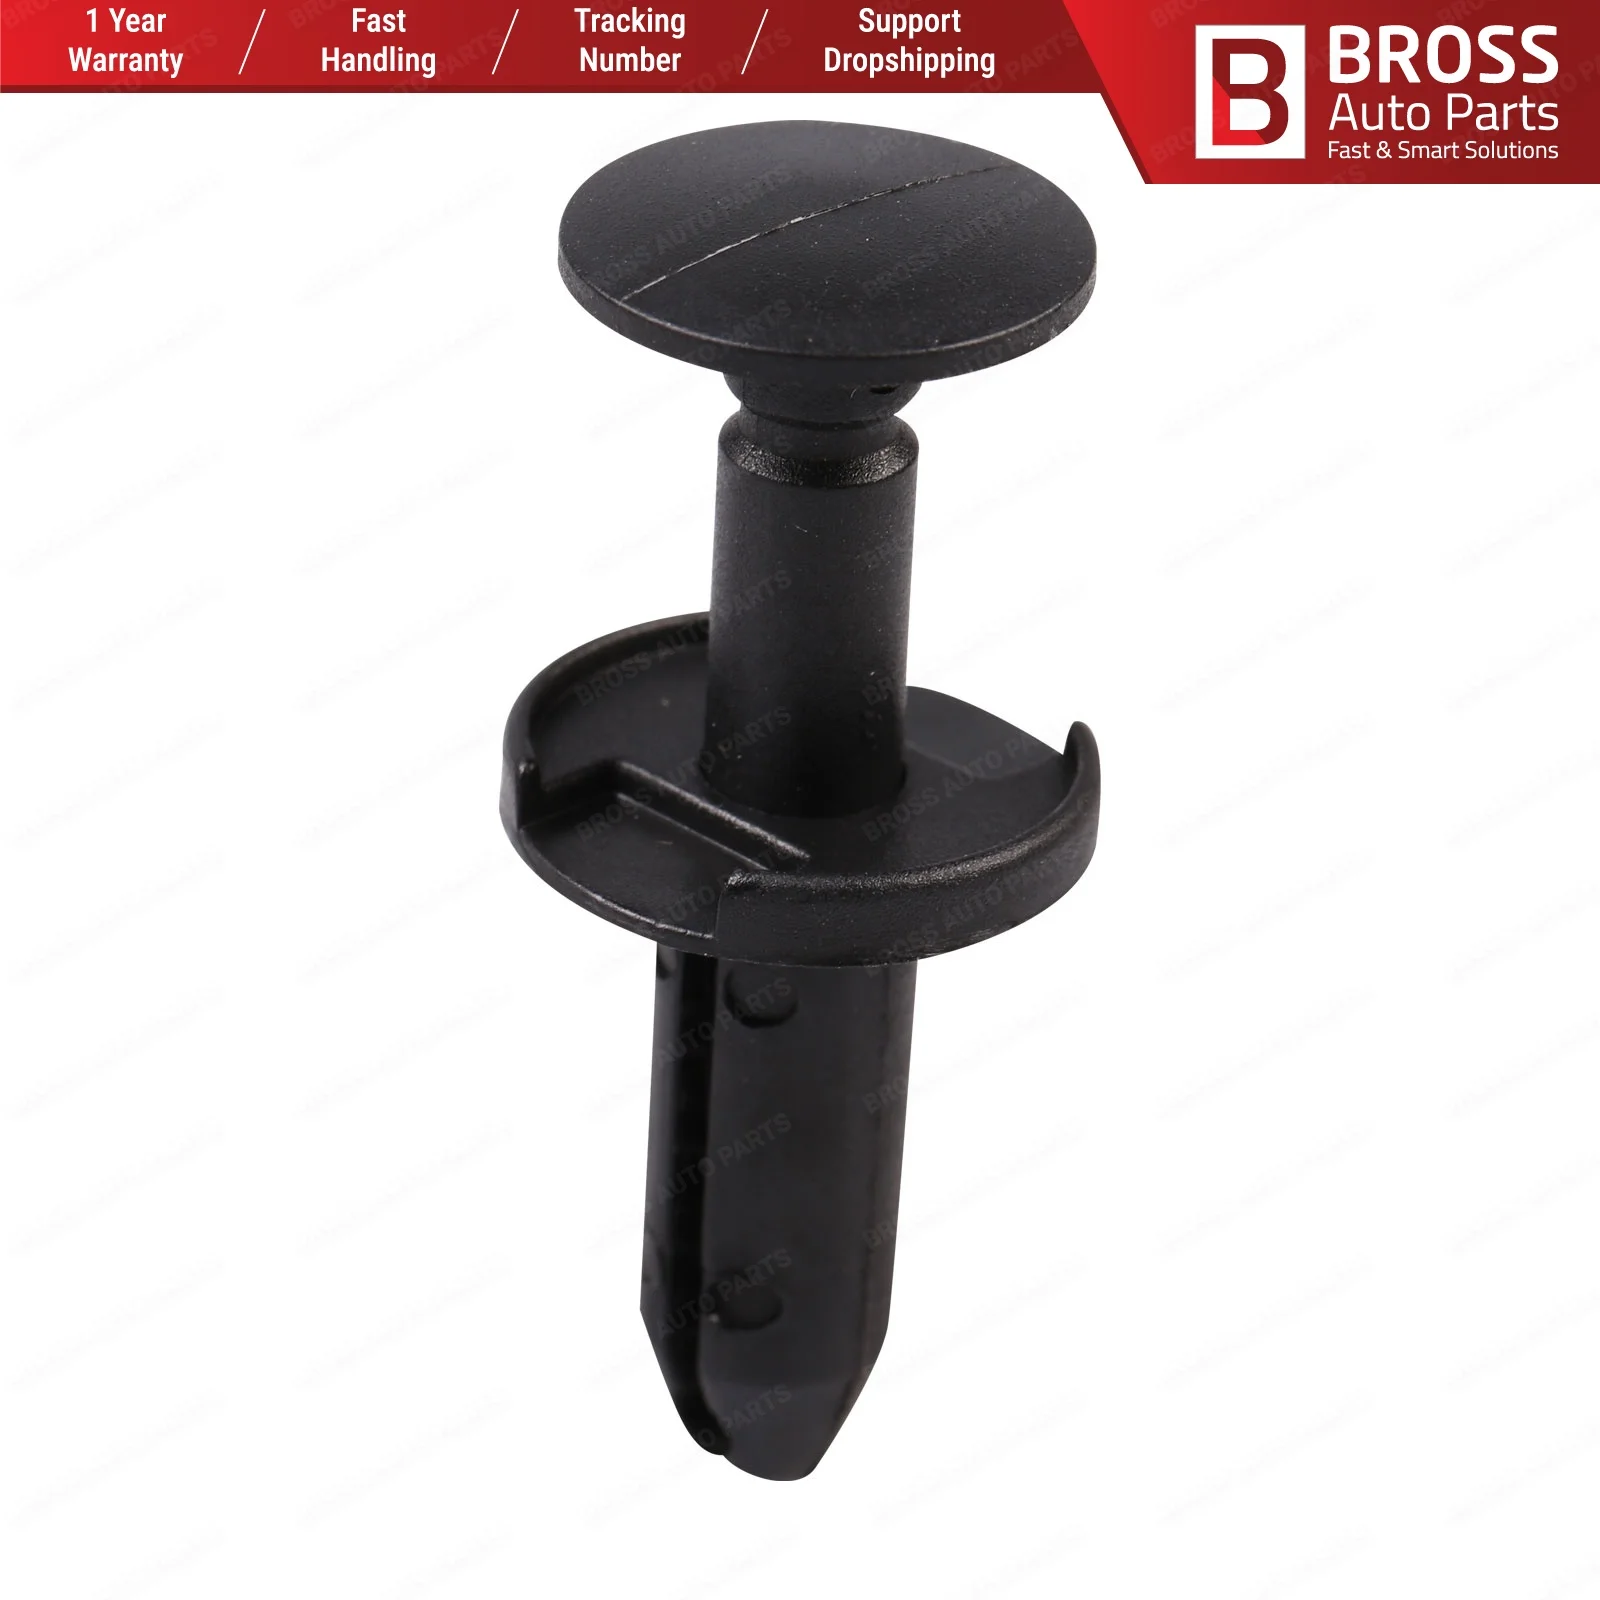 

Bross Auto Parts BCF1635 10 Pieces Fascia Push-Type Retainer for Chrysler : 6504521 Made in Turkey